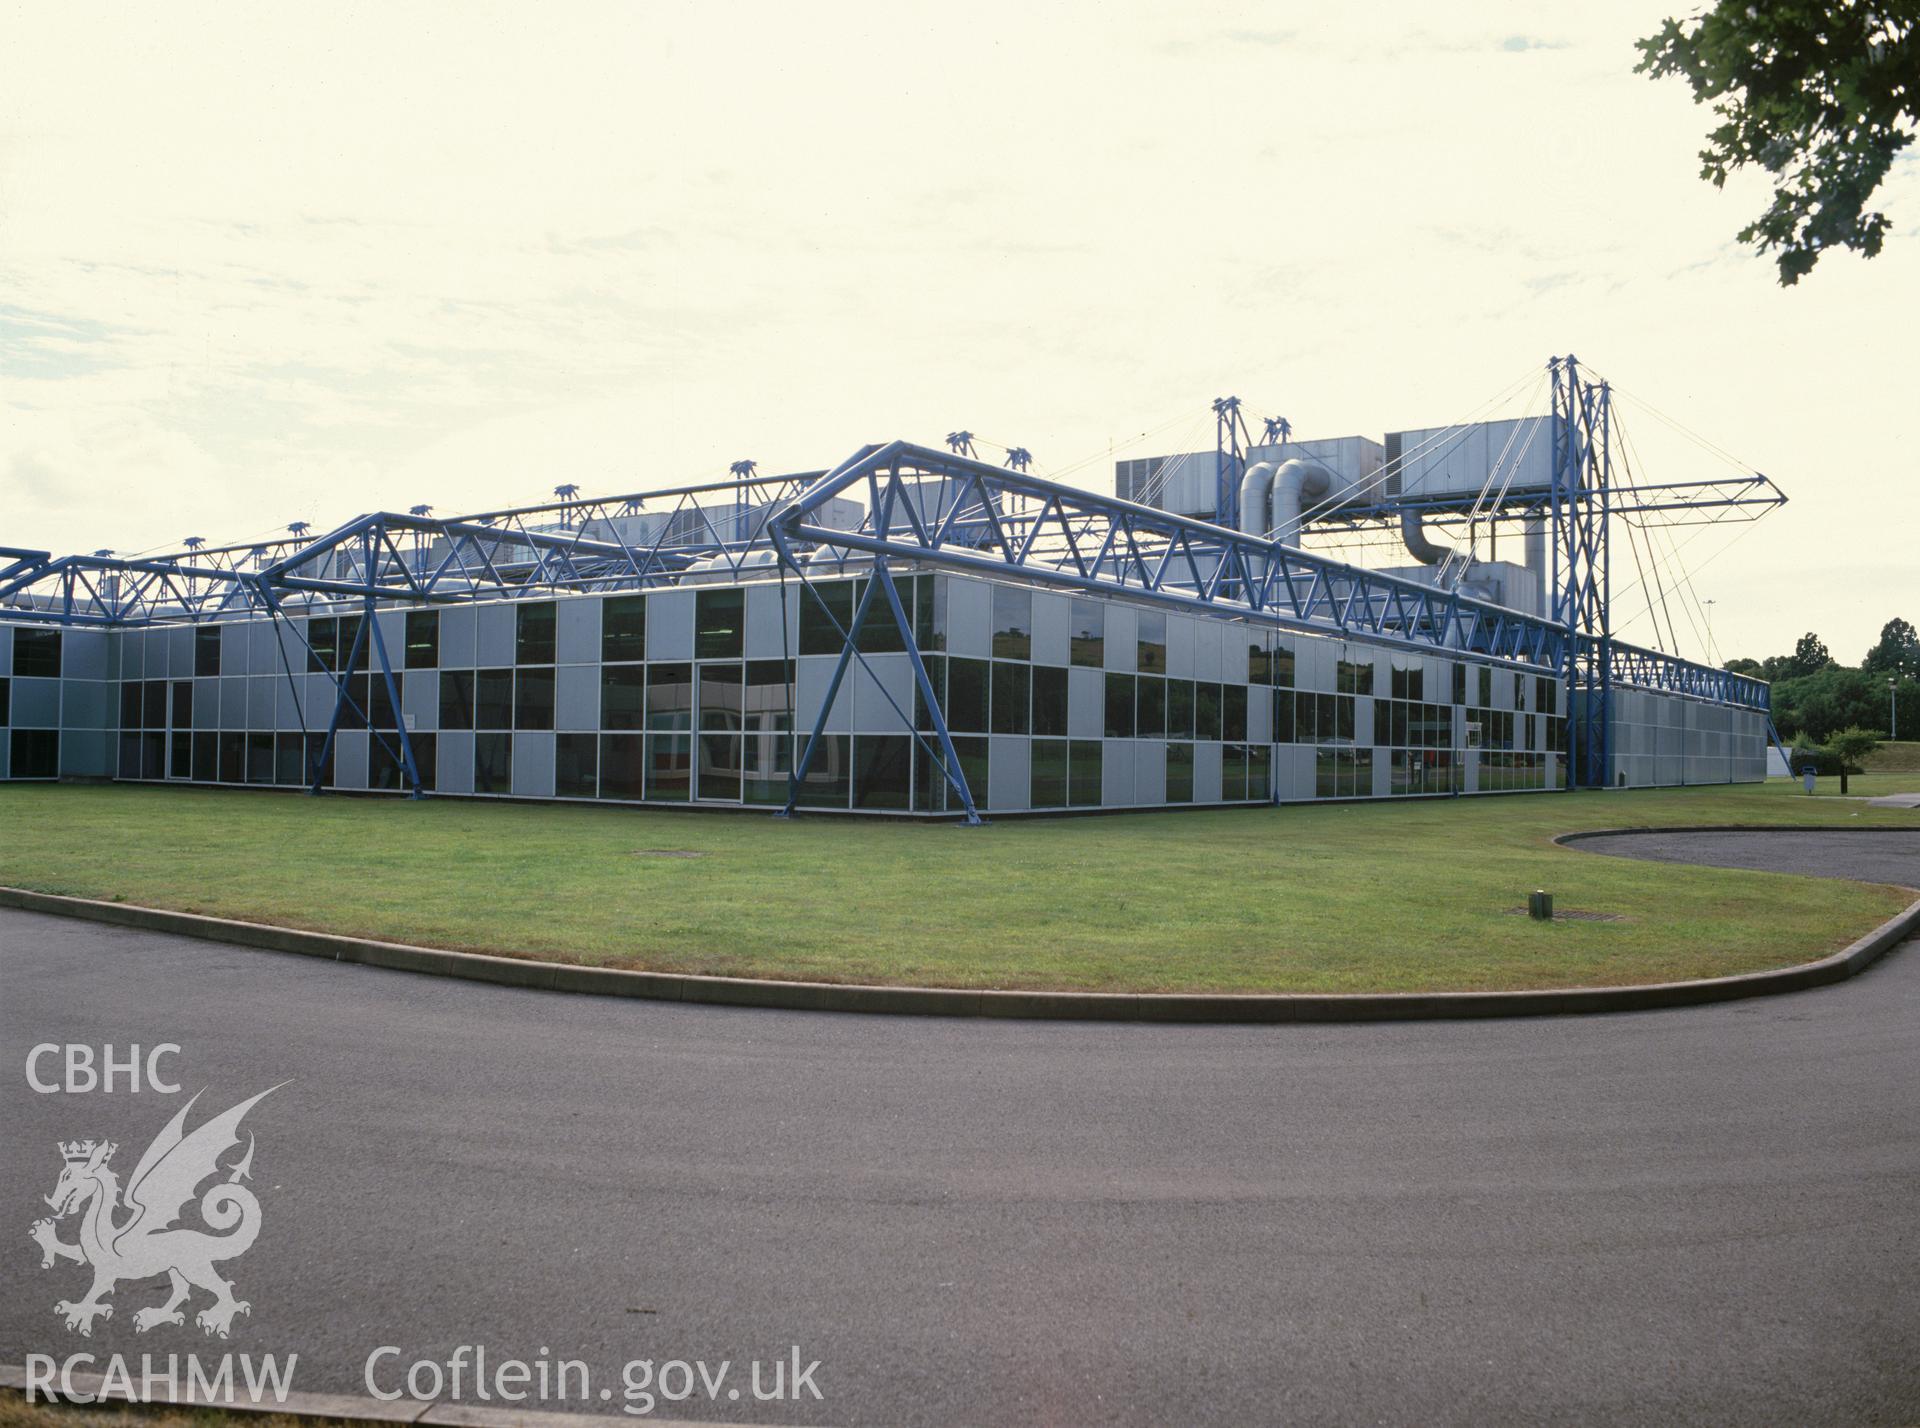 Digital copy of a colour negative showing INMOS factory, Newport.